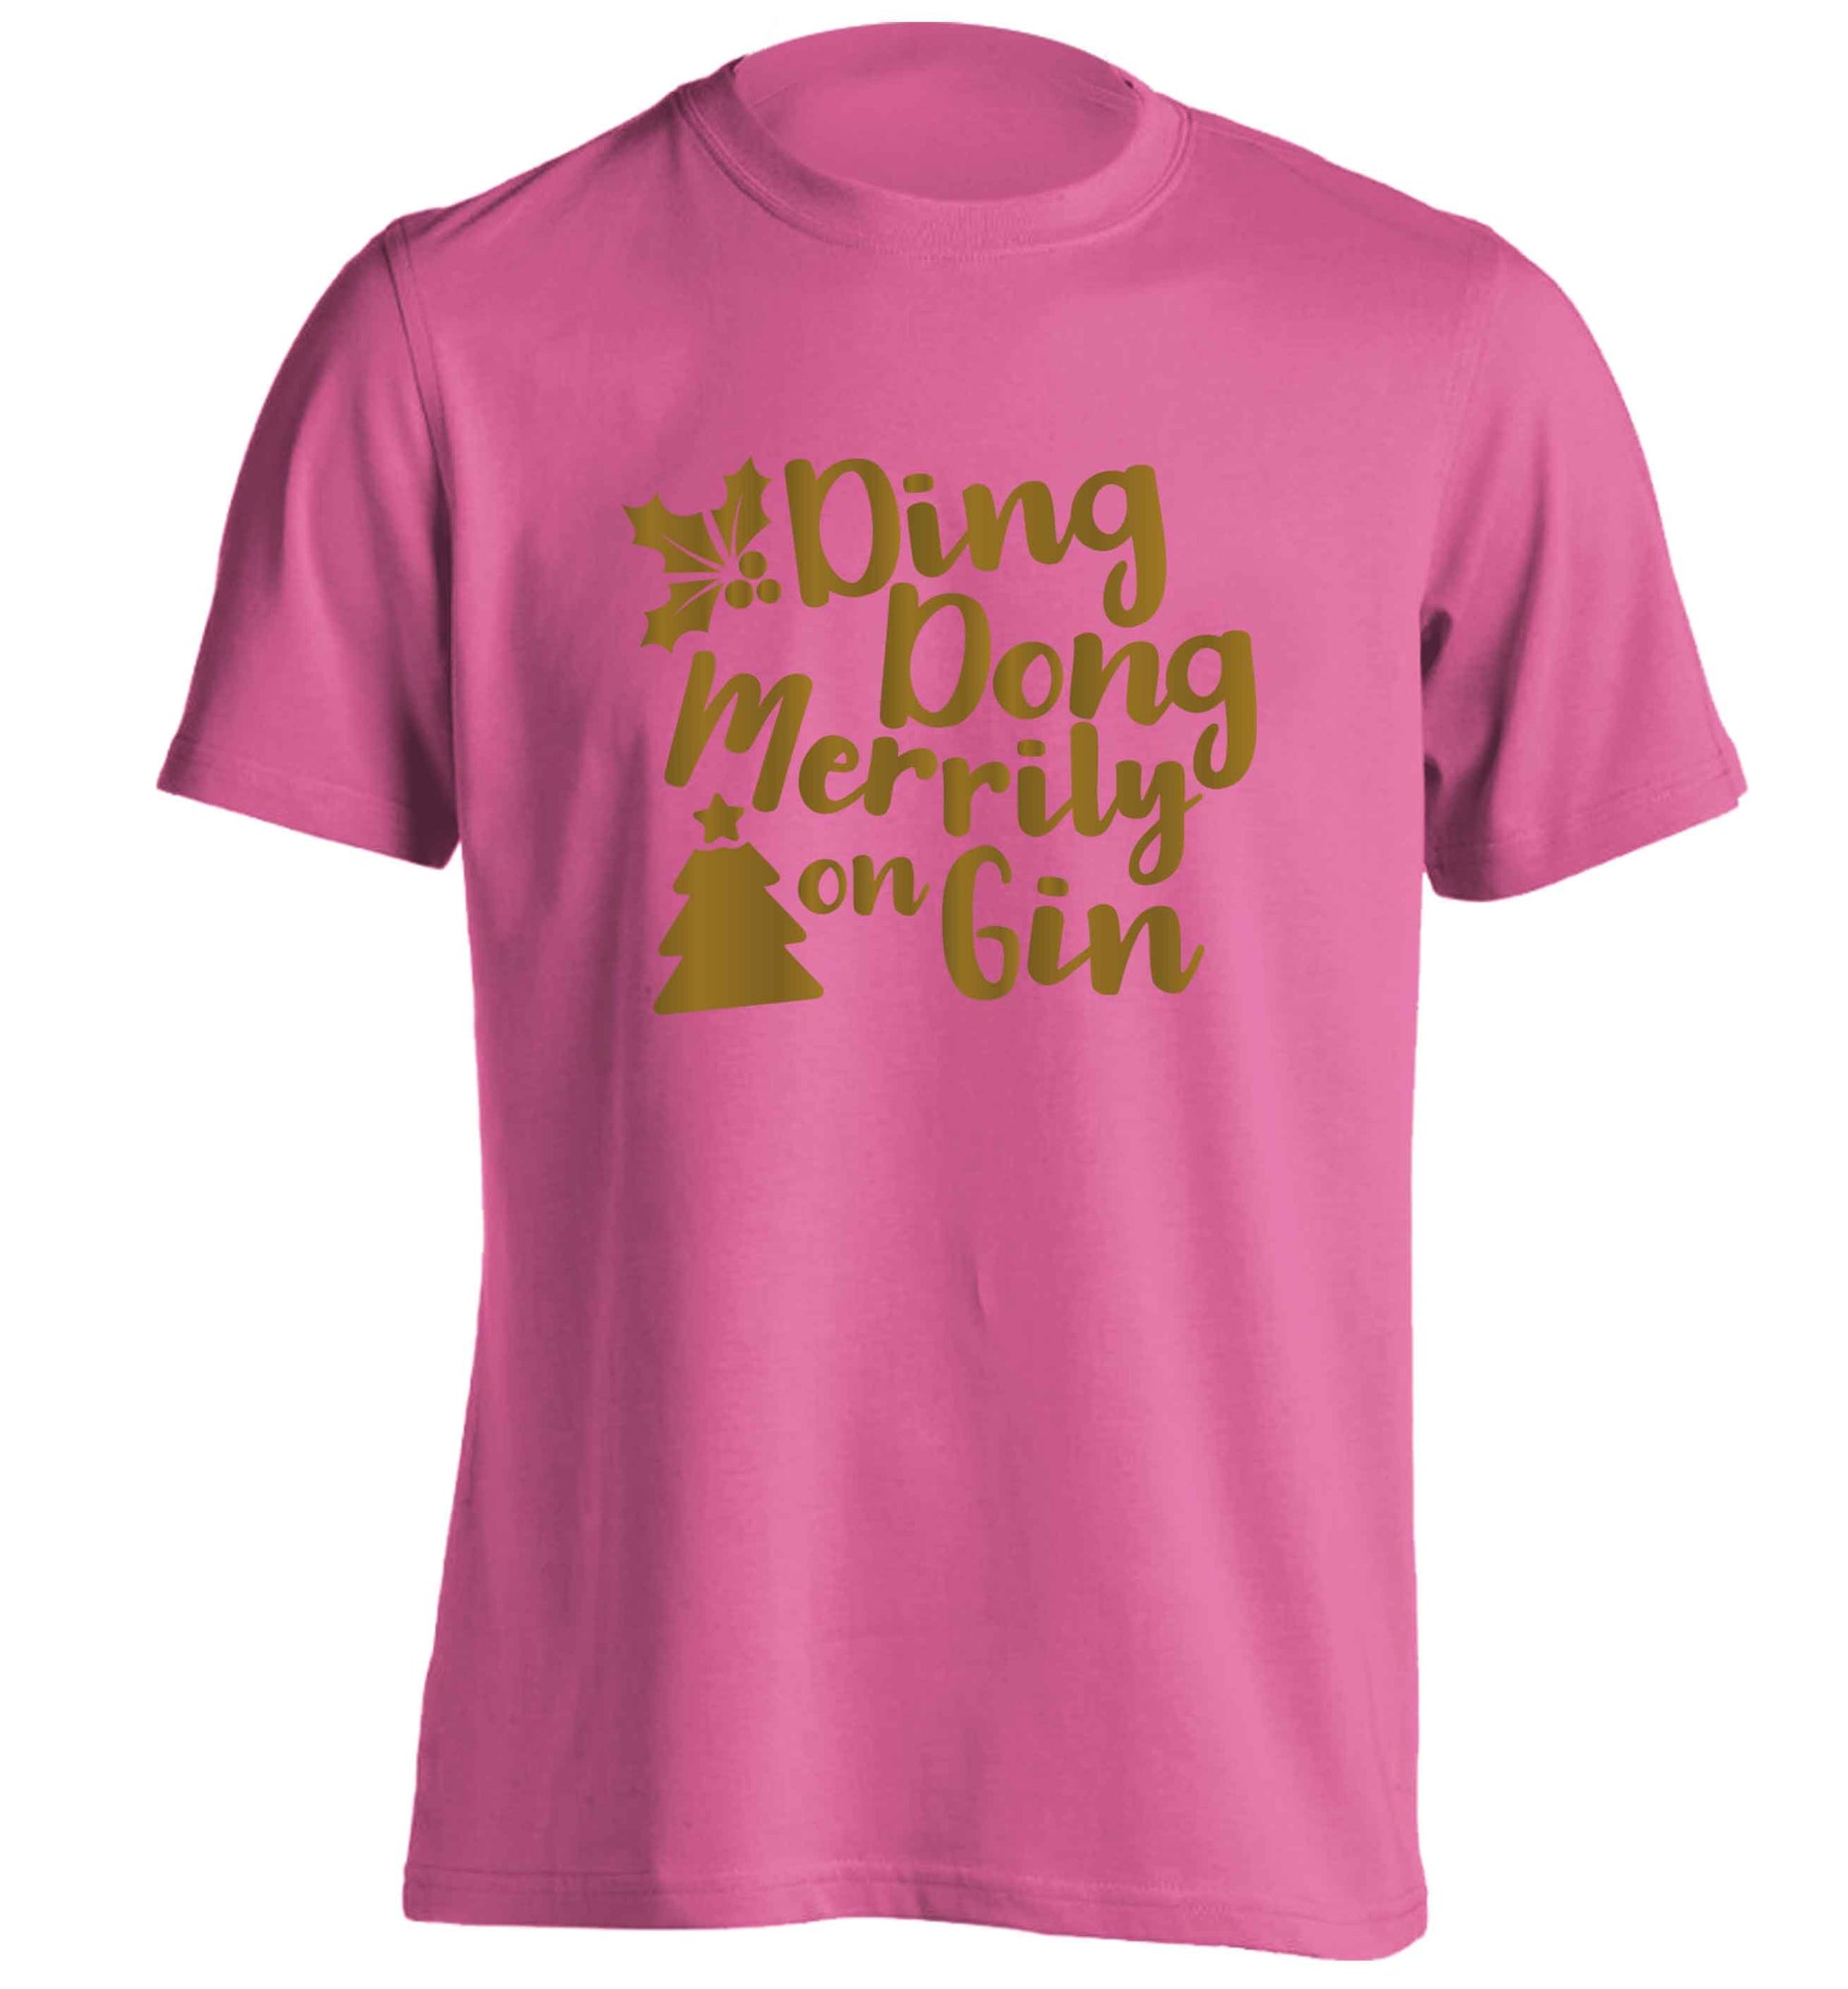 Ding dong merrily on gin adults unisex pink Tshirt 2XL